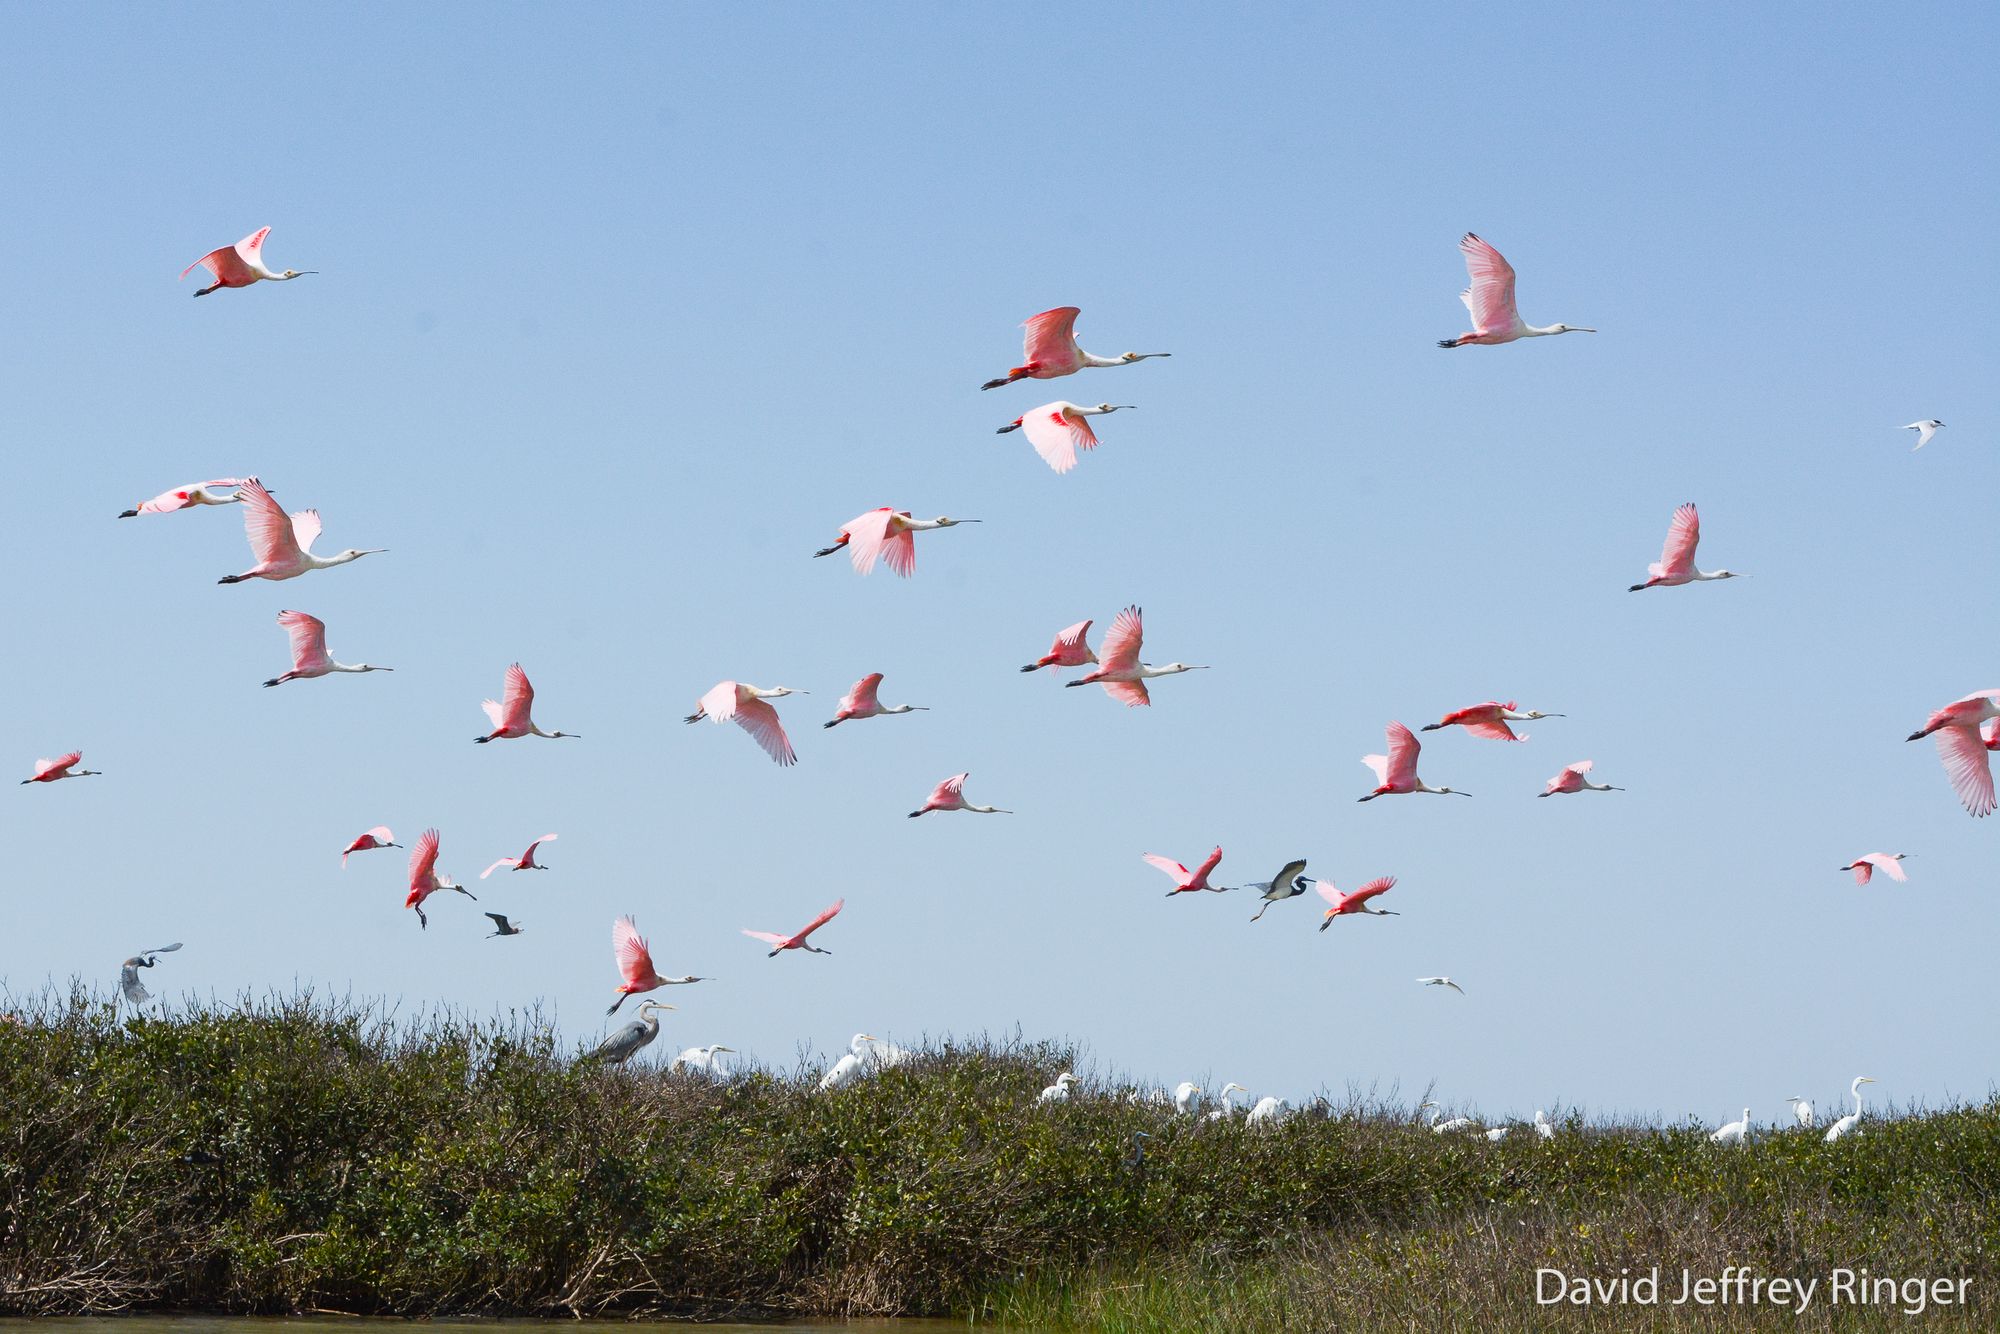 30 bright pink Roseate Spoonbills fly into a blue sky above a small green island where herons and egrets are perched.